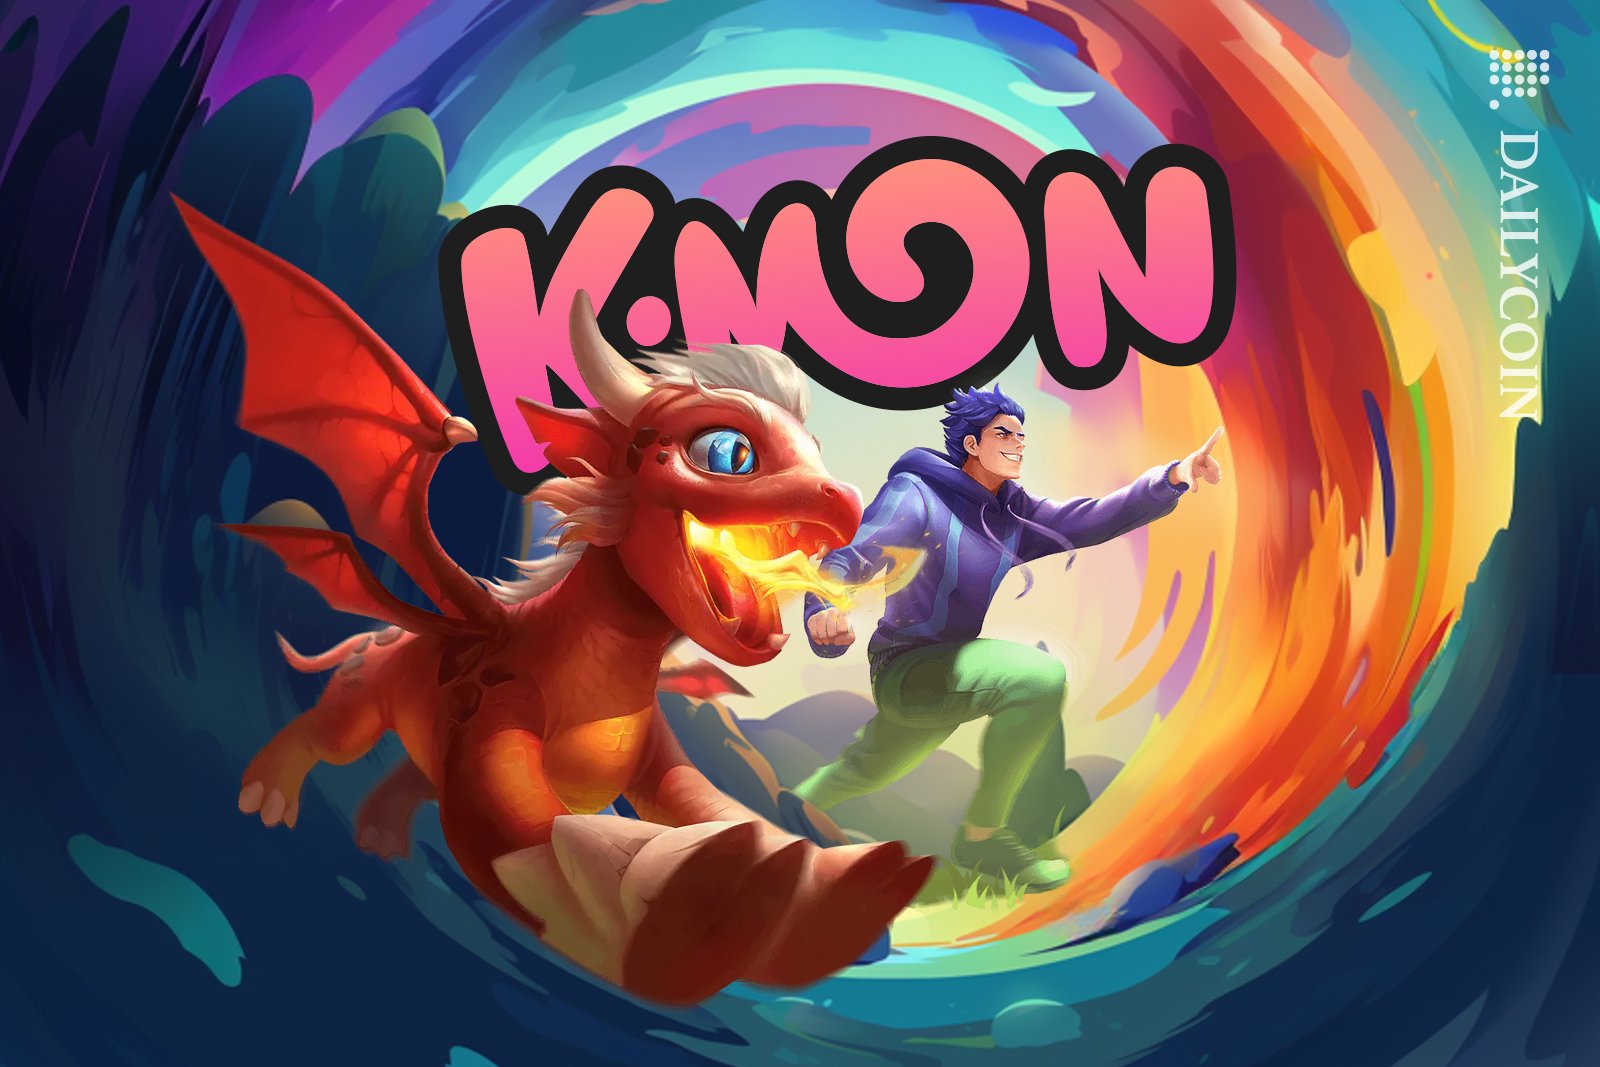 A web3 game characters, a dragon and a man, running in front of a KMON sign.